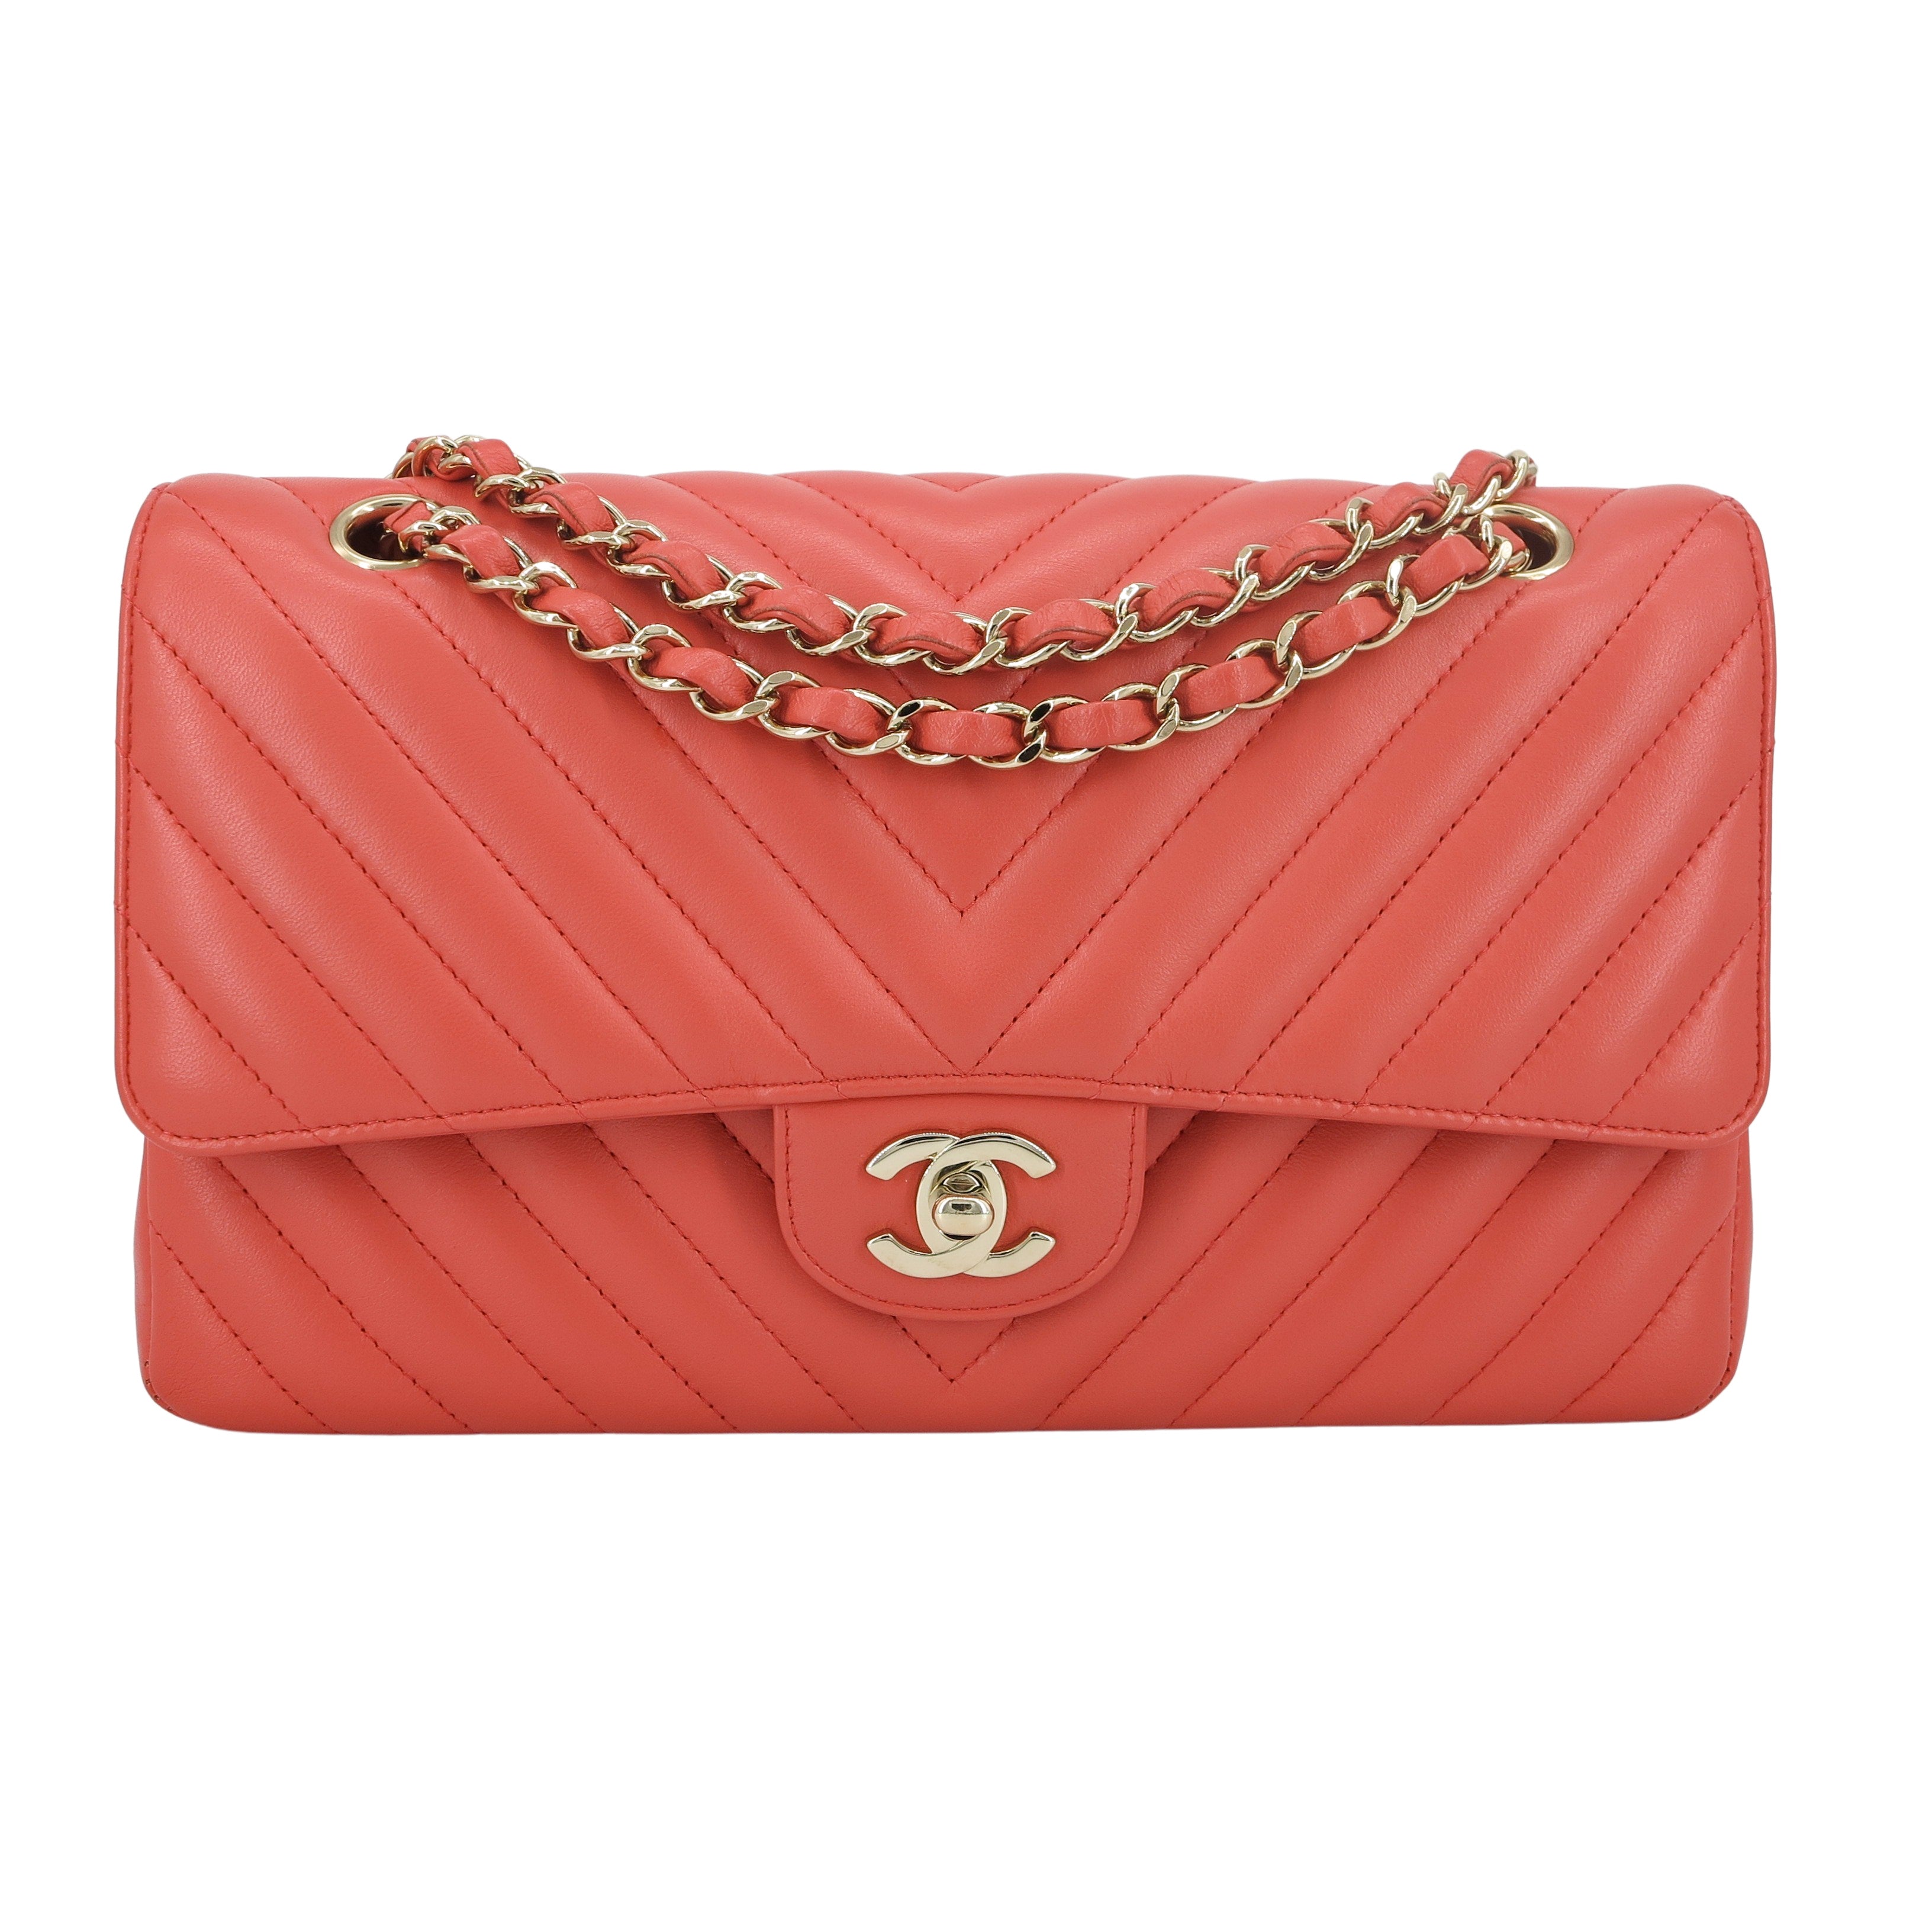 Chanel Chevron Medium Classic Double Flap Bag in Pink Coral Red Lambskin | Dearluxe